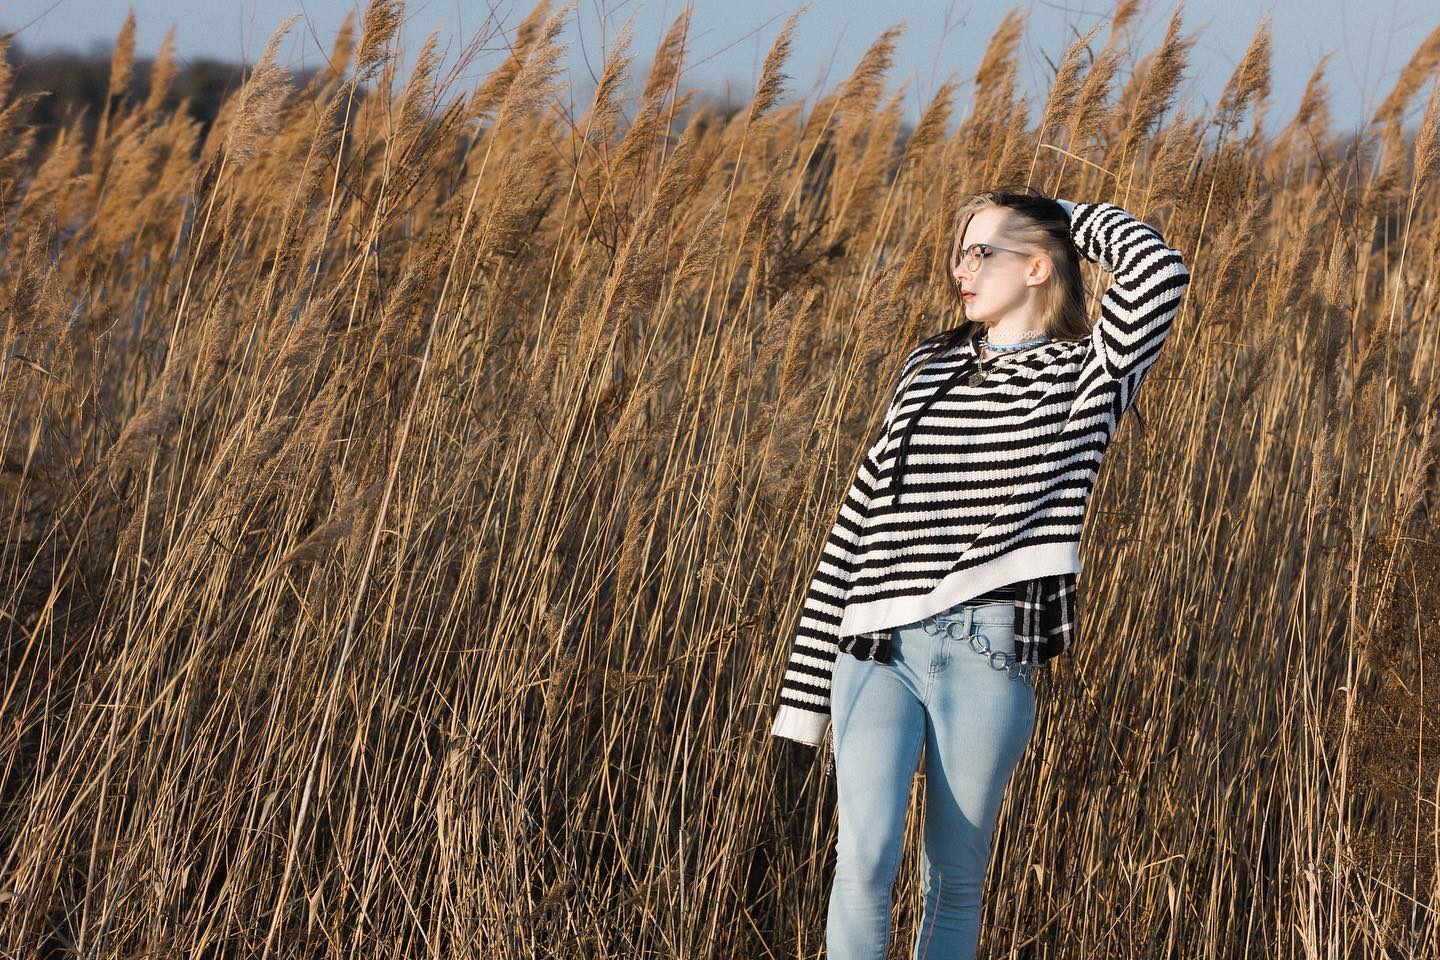 Sometimes I feel so invisible I wonder if I’m here at all. #photography #photographer #reeds #cattails #pose #artsy #quote #bookish #bookworm #fashion #art #nature #love